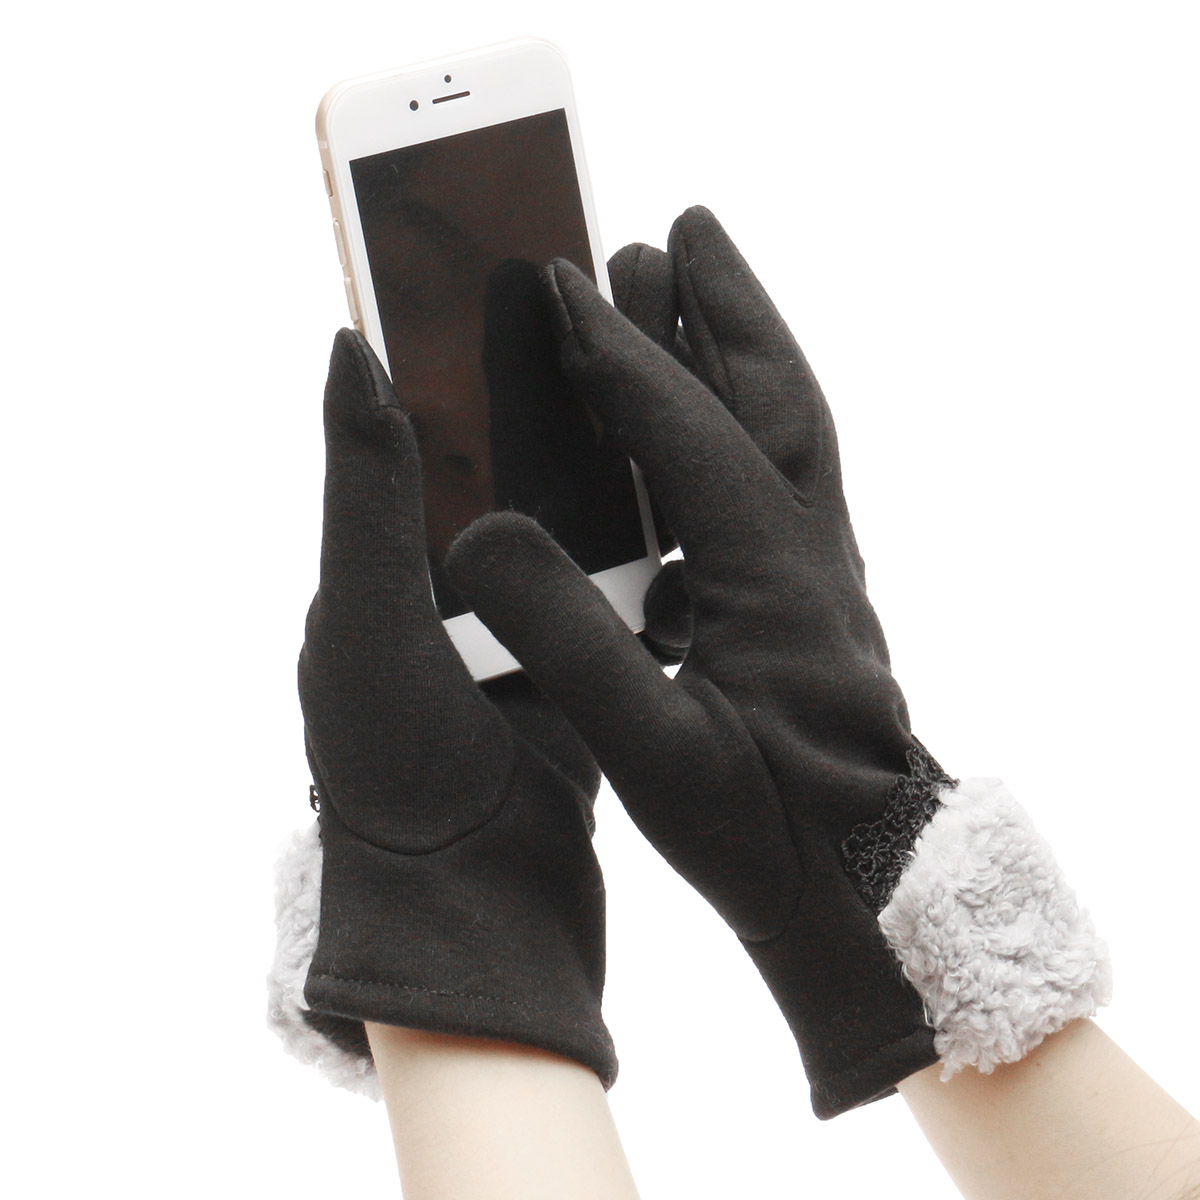 Women-Winter-Gloves-Touch-Screen-Warm-Gloves-Outdoor-Driving-Gloves-For-Smartphone-1095654